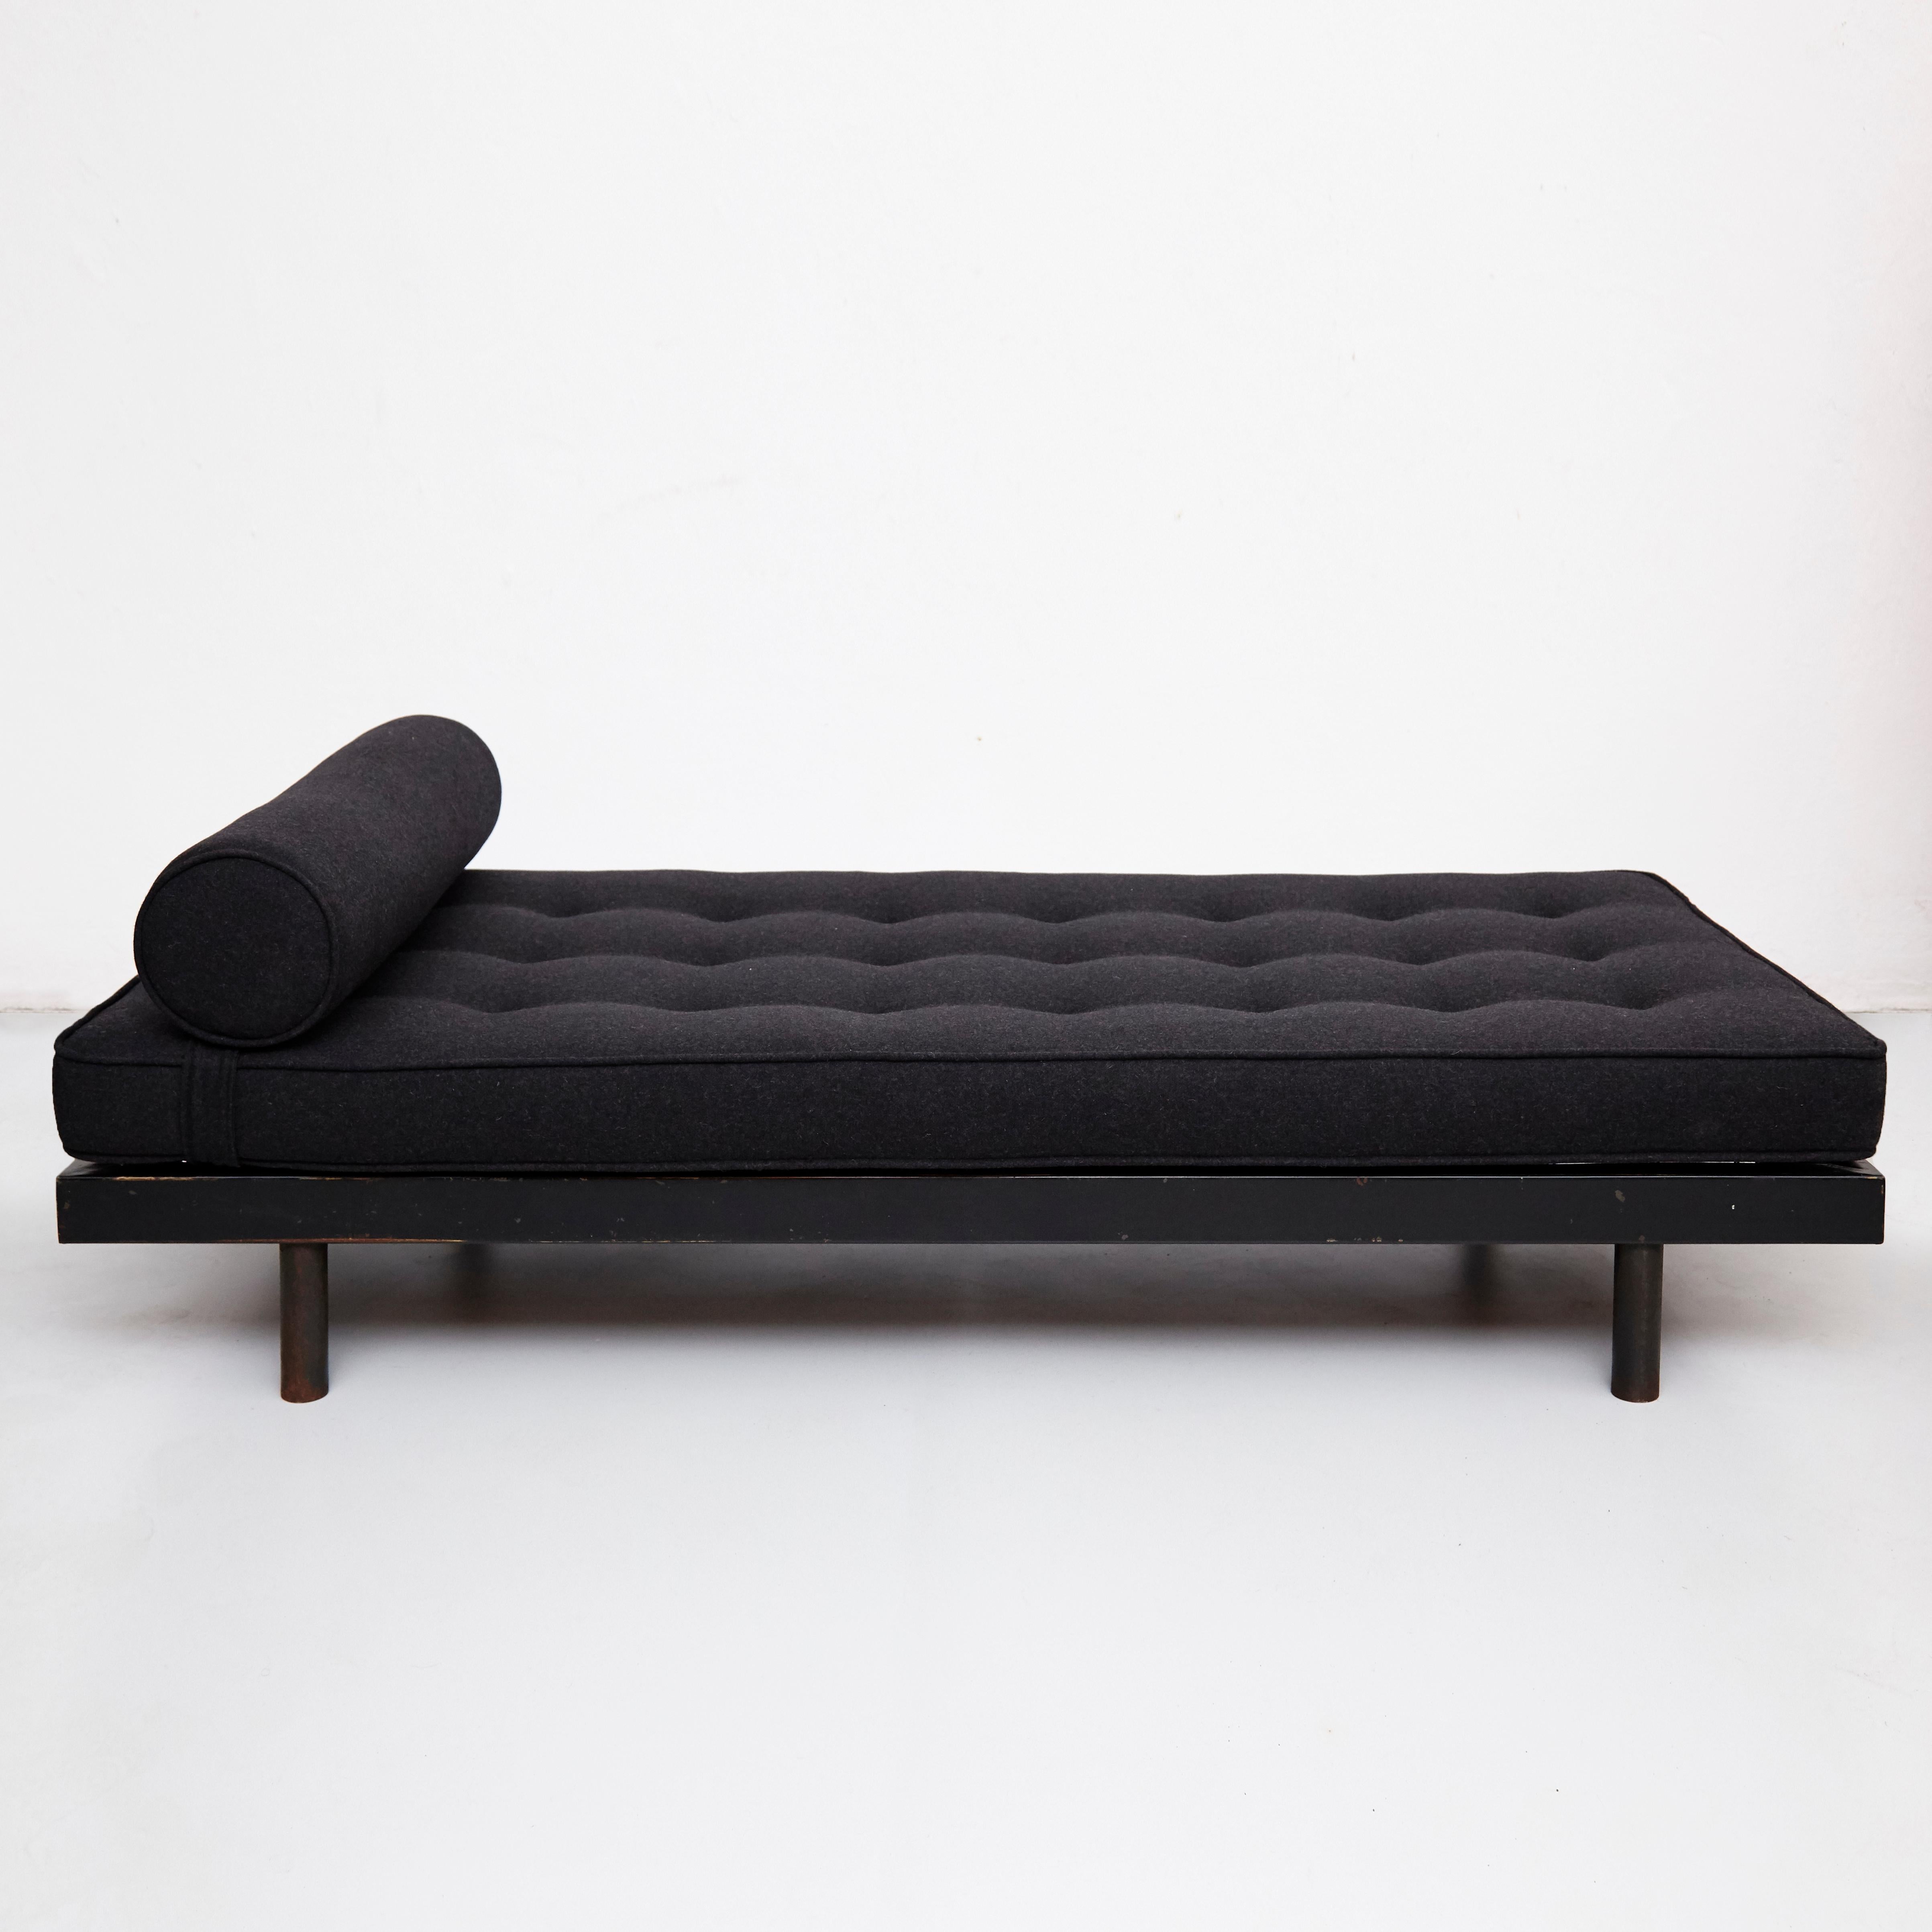 French Jean Prouvé S.C.A.L. Daybed, circa 1950